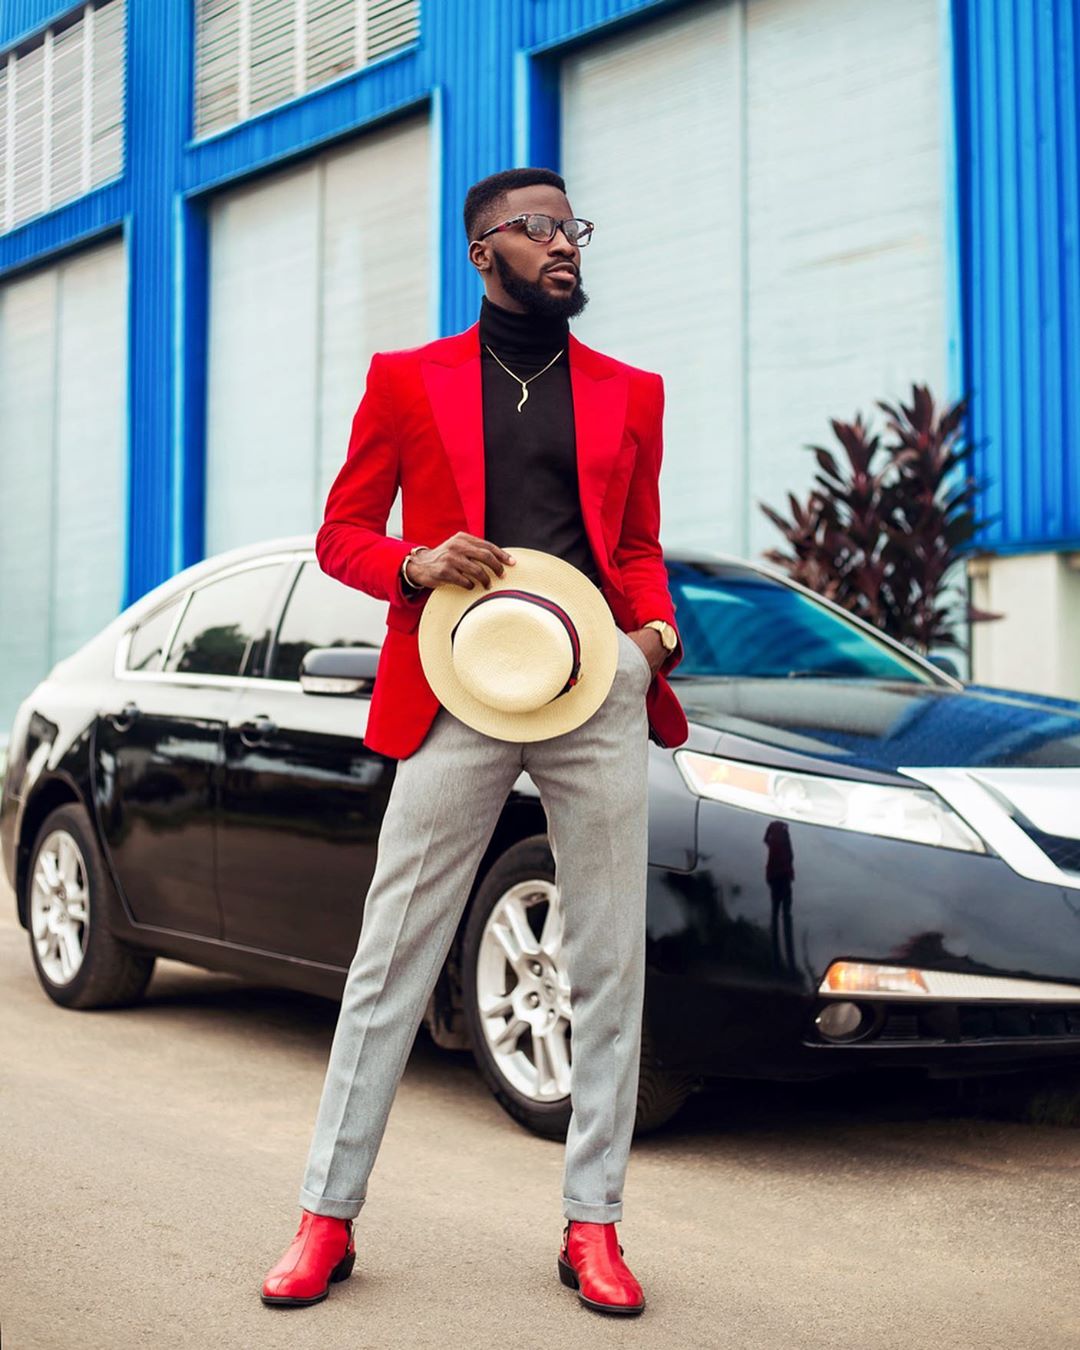 African Men 2020: Celebs Across Africa Show Us Off-Duty Style